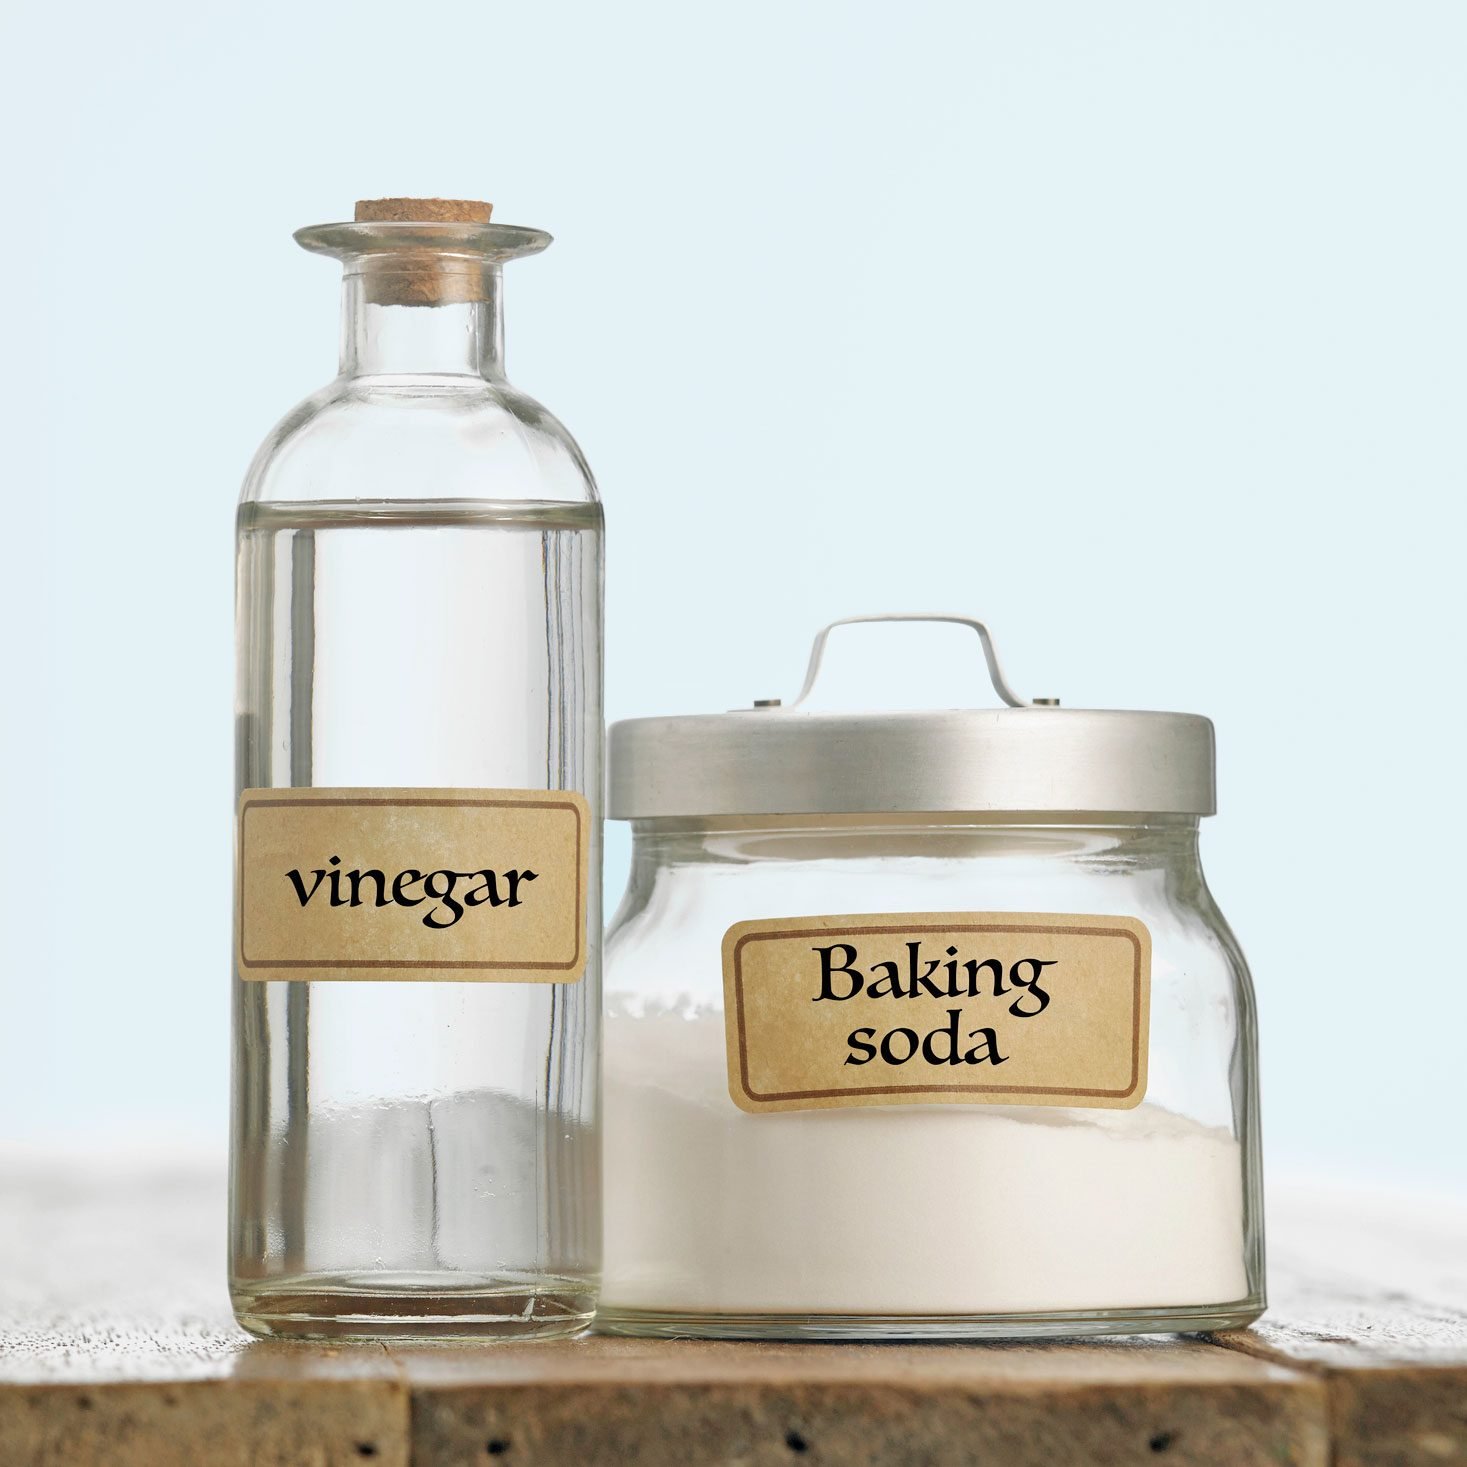 Top 11 Reasons to Use Vinegar in Laundry and Its Benefits